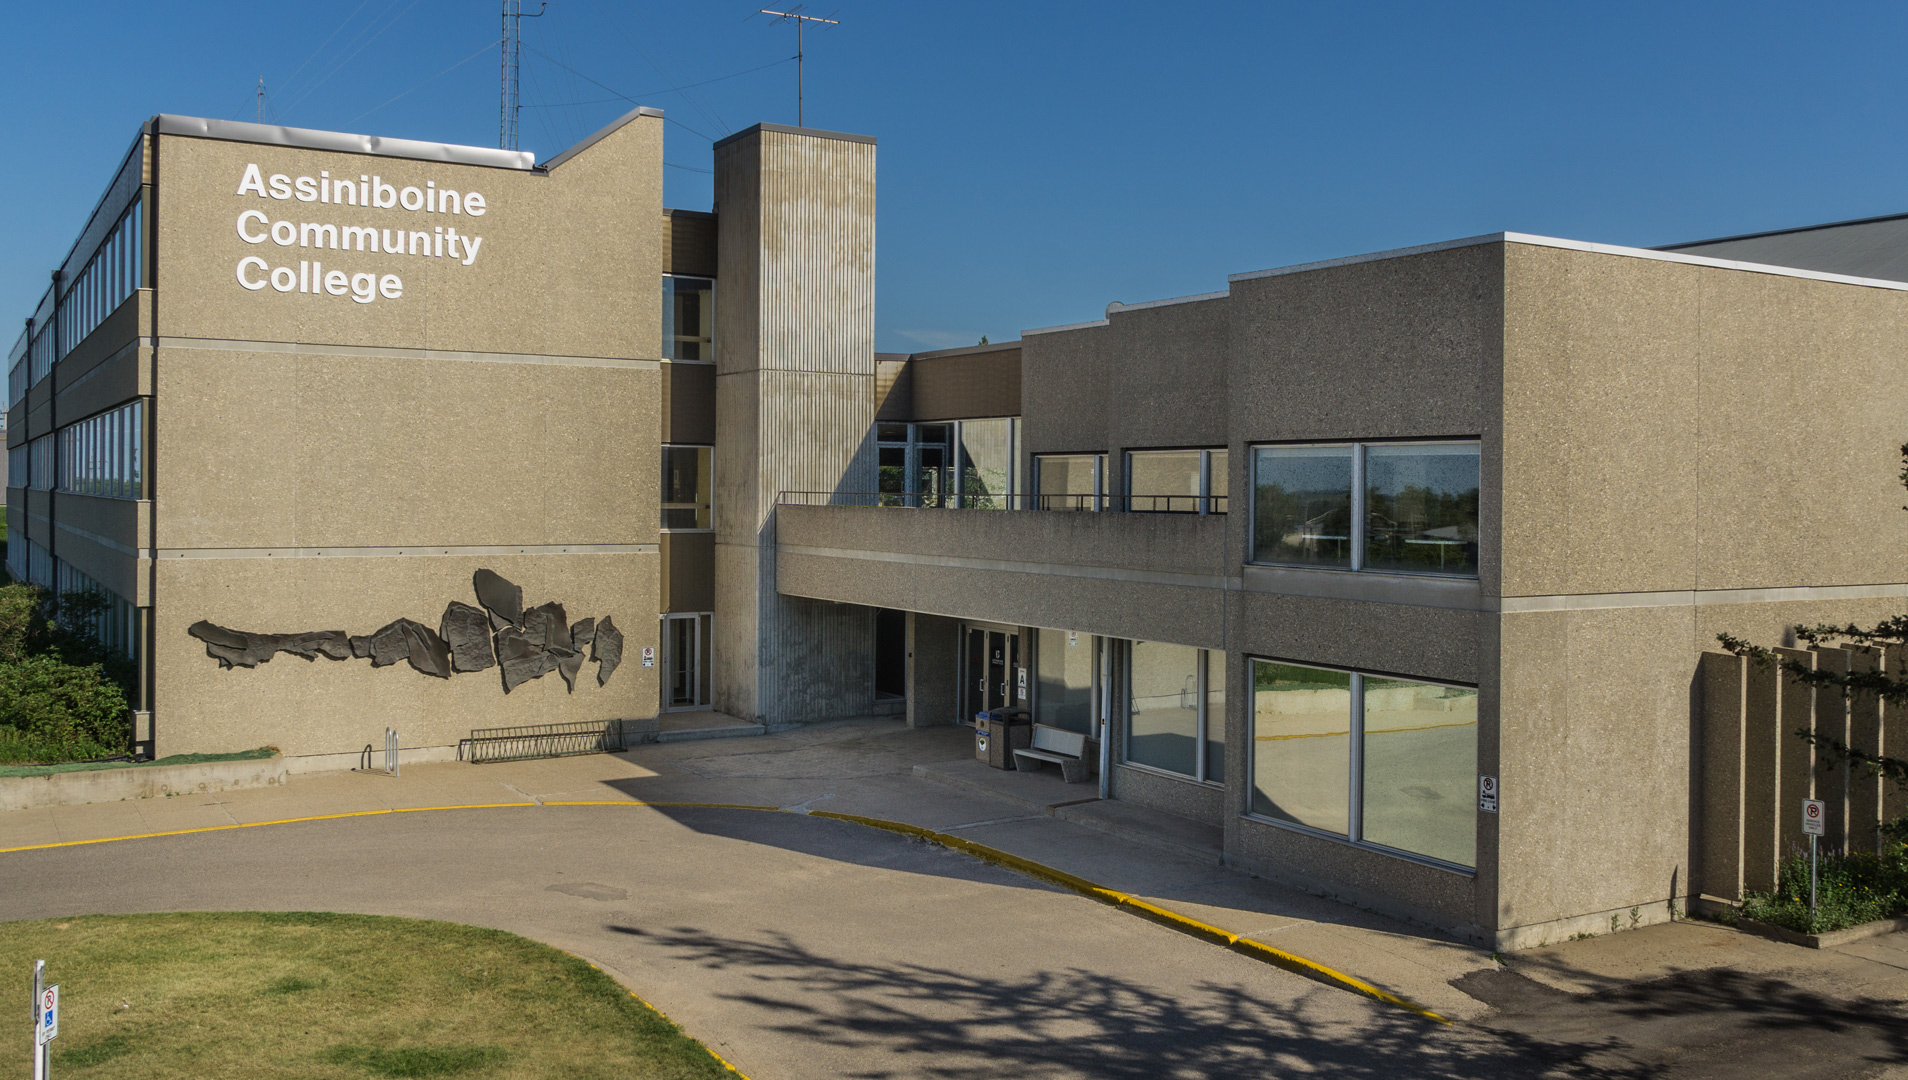 Assiniboine Community College is preparing to welcome thousands of new students this academic year